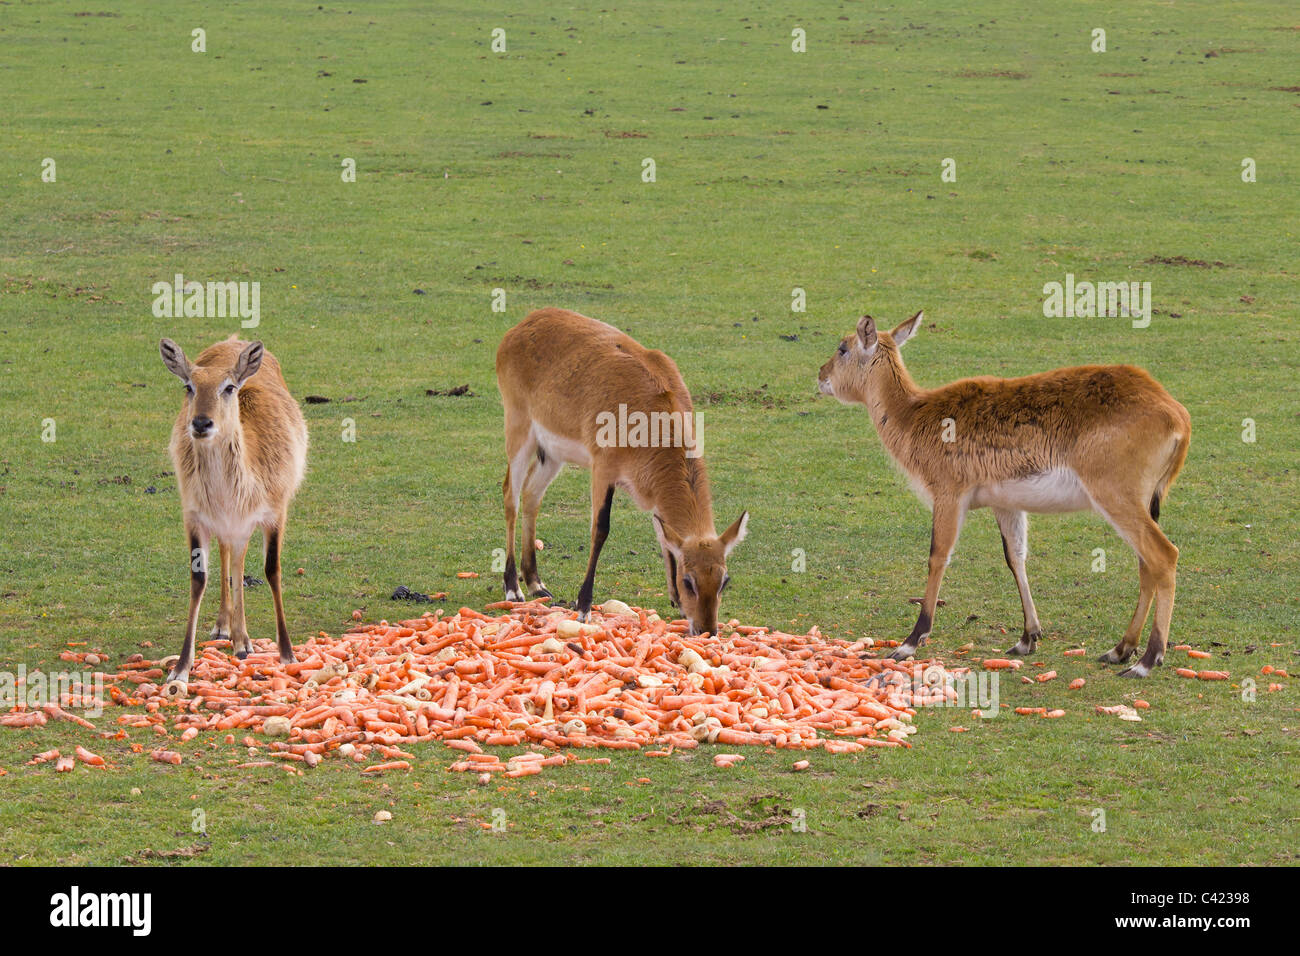 These antelopes from Africa are very cute looking deer like animals Stock Photo